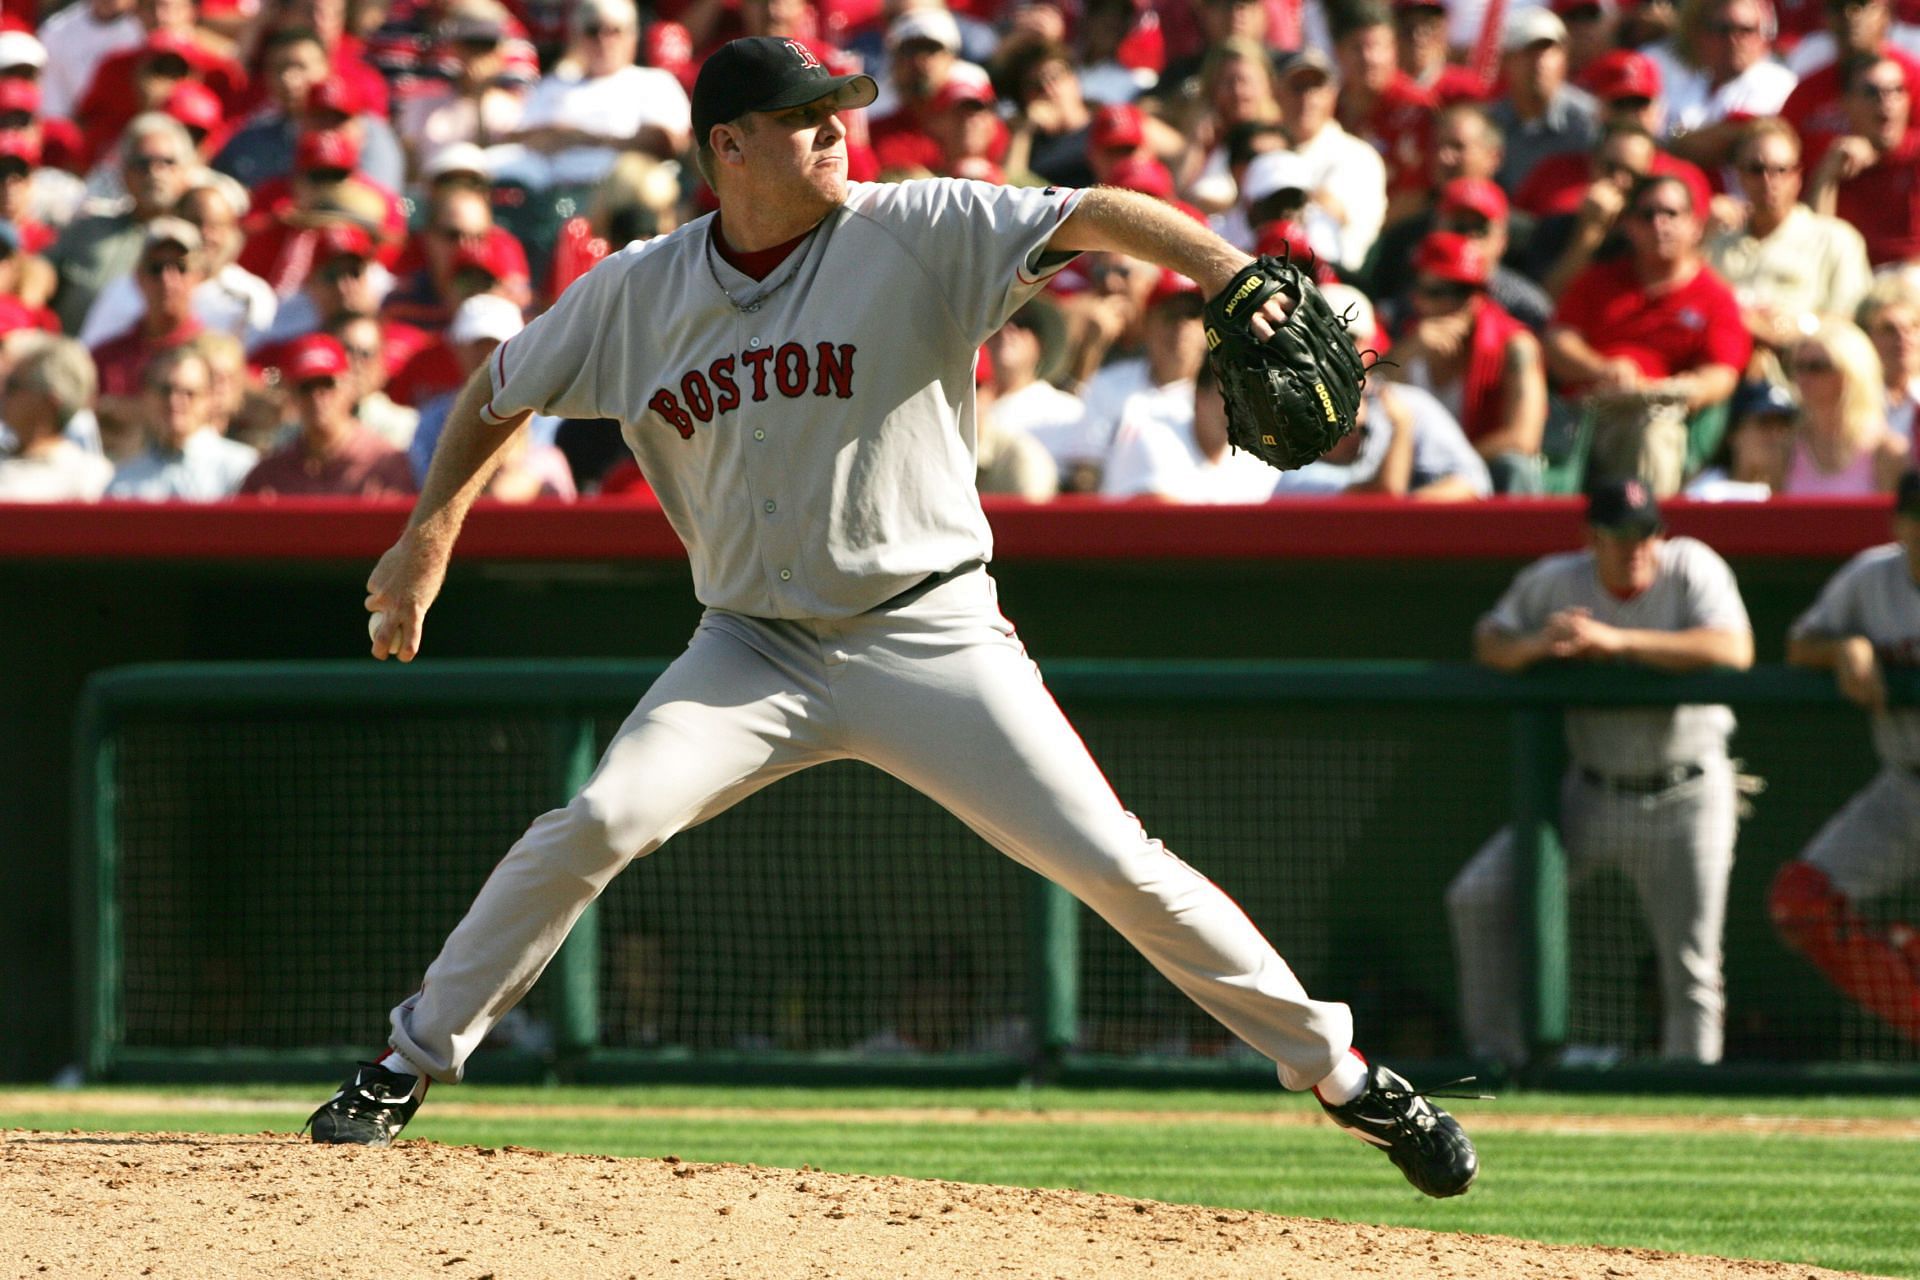 Pitcher Curt Schilling delivers a pitch during the American League Division Series in Anaheim.